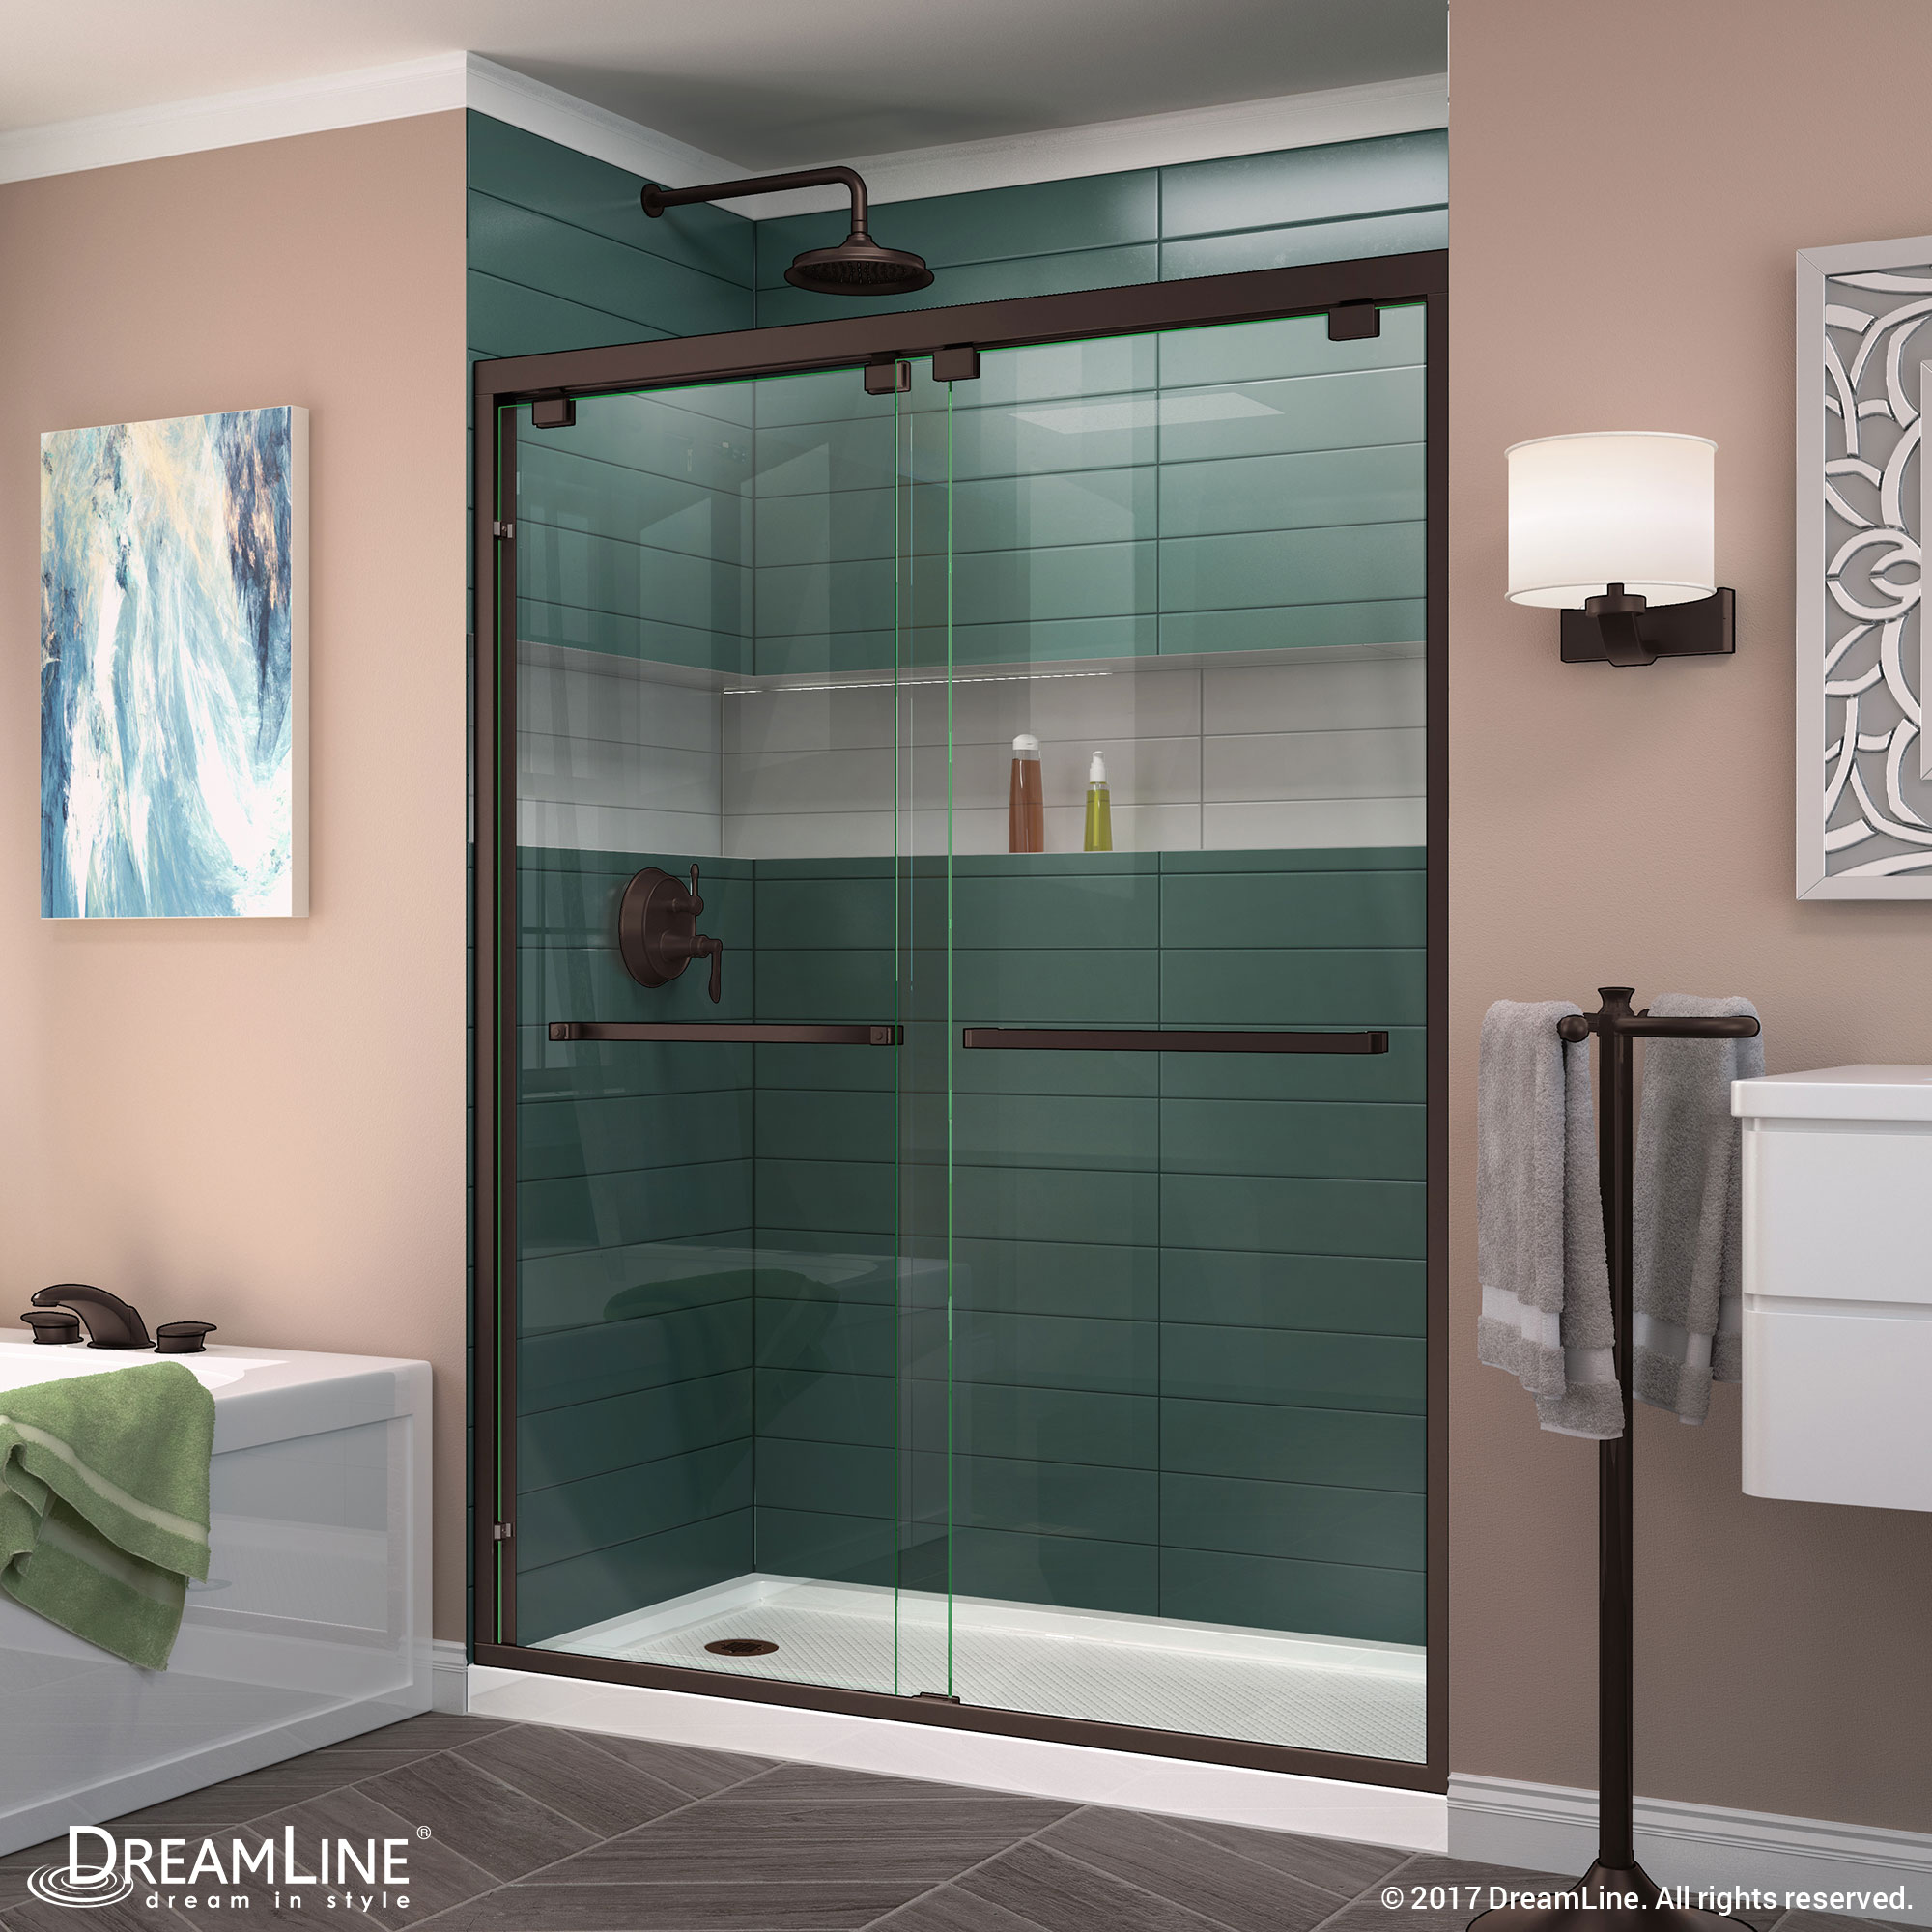 DreamLine Encore 32 in. D x 60 in. W x 78 3/4 in. H Bypass Shower Door in Brushed Nickel and Left Drain White Base Kit